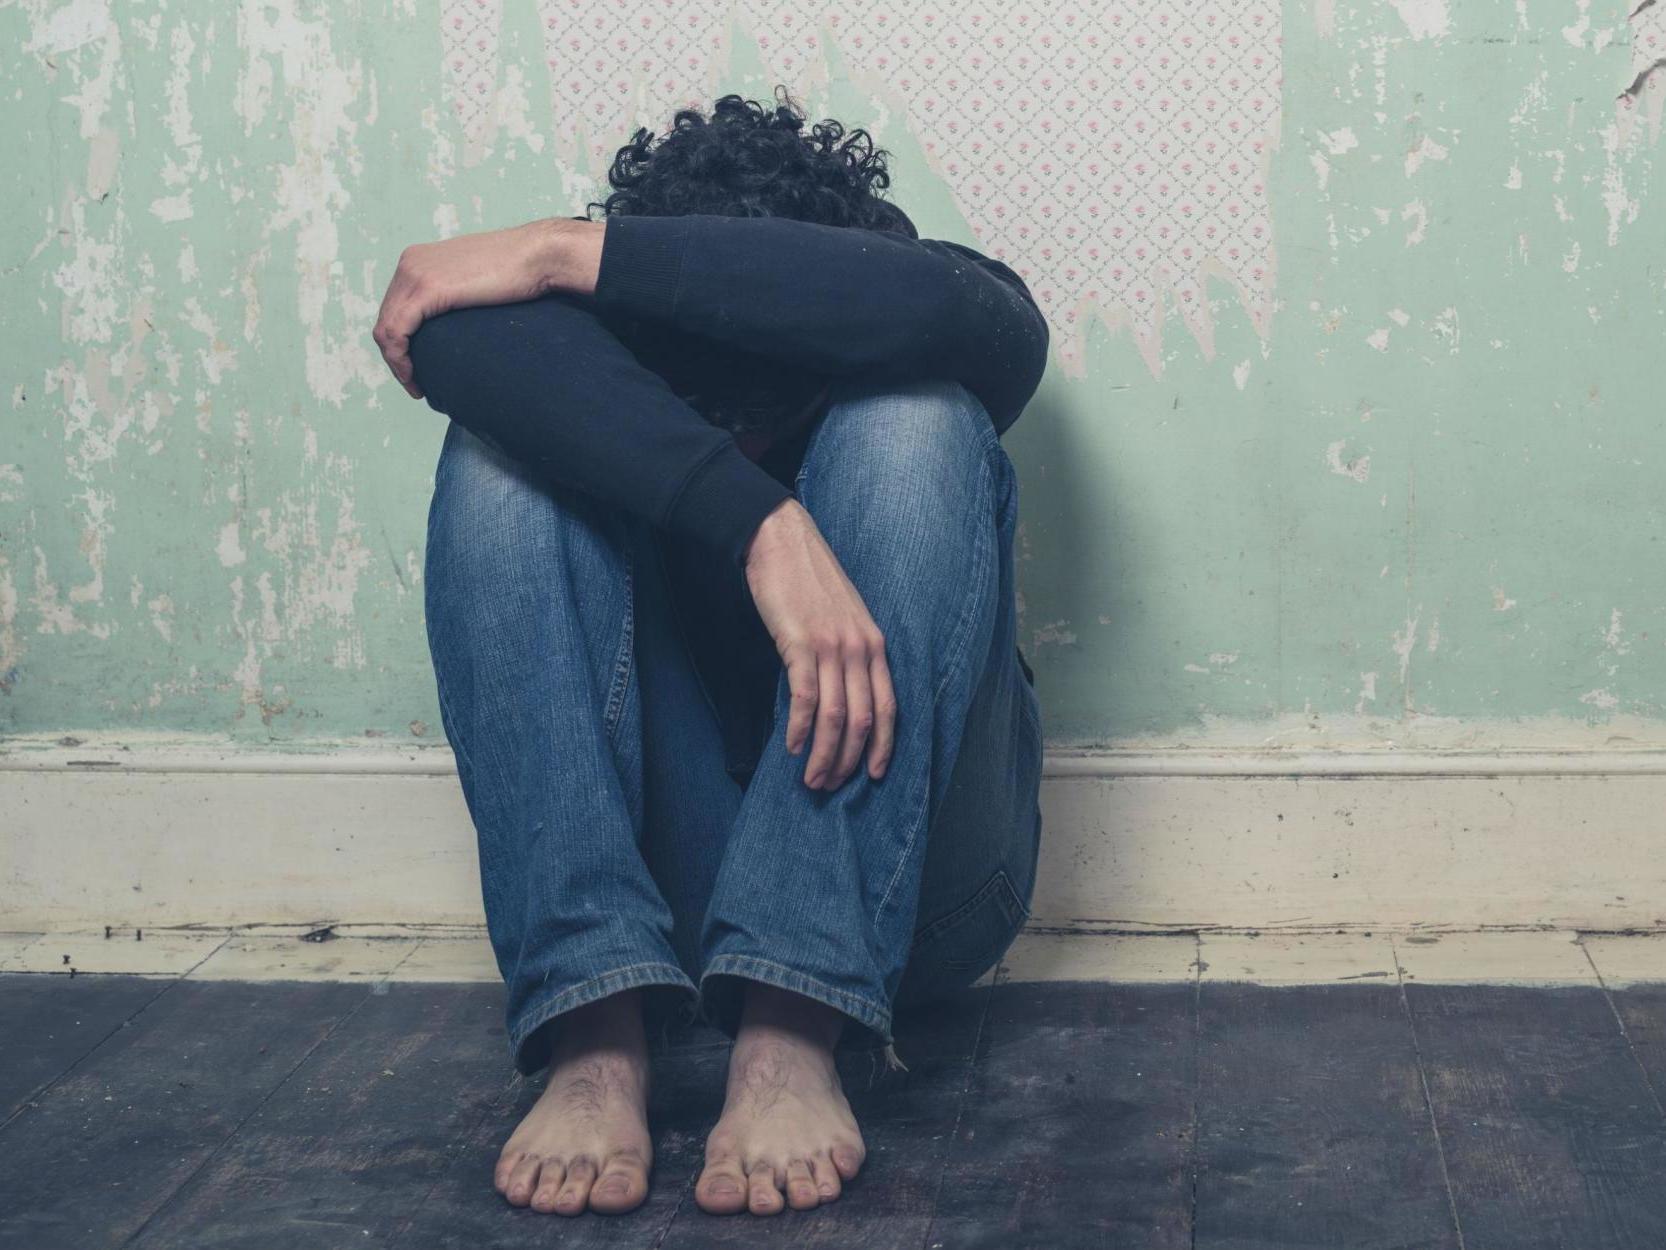 Around 3,235 cases of self-harm among girls aged 13-17 were recorded at English hospitals in the year 2019-20, up from 980 in 2009-10, the analysis of NHS statistics found